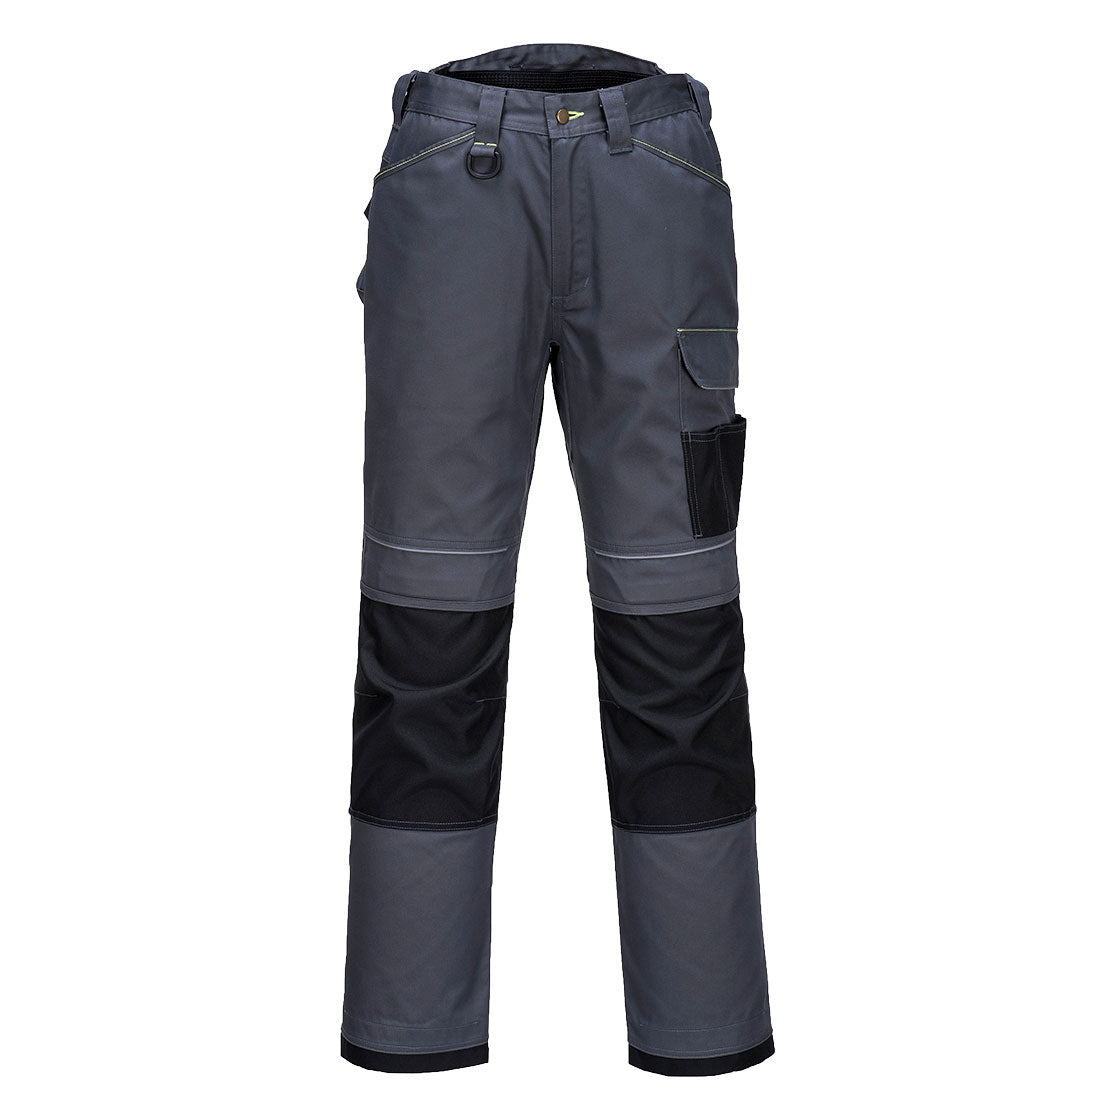 Portwest- PW3 Durable Kneepad Work Trousers & Free Kneepads - T601